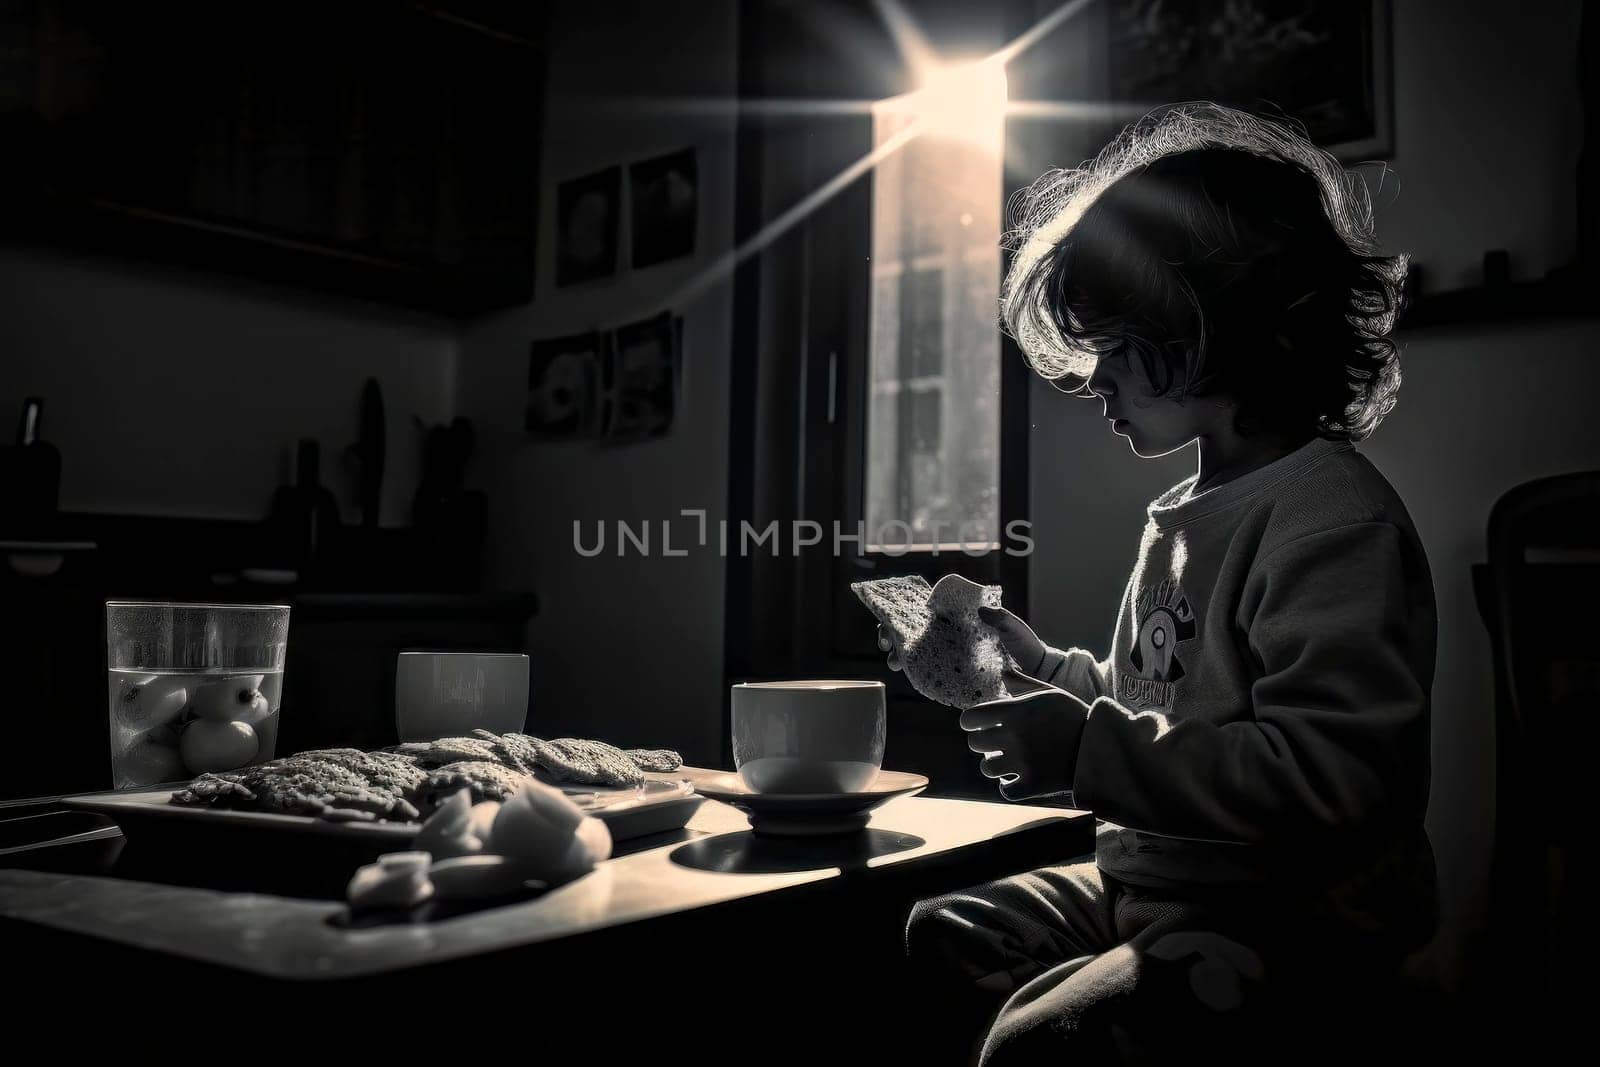 An evocative image of a child eating alone in a dimly lit house, capturing a sense of solitude and introspection.